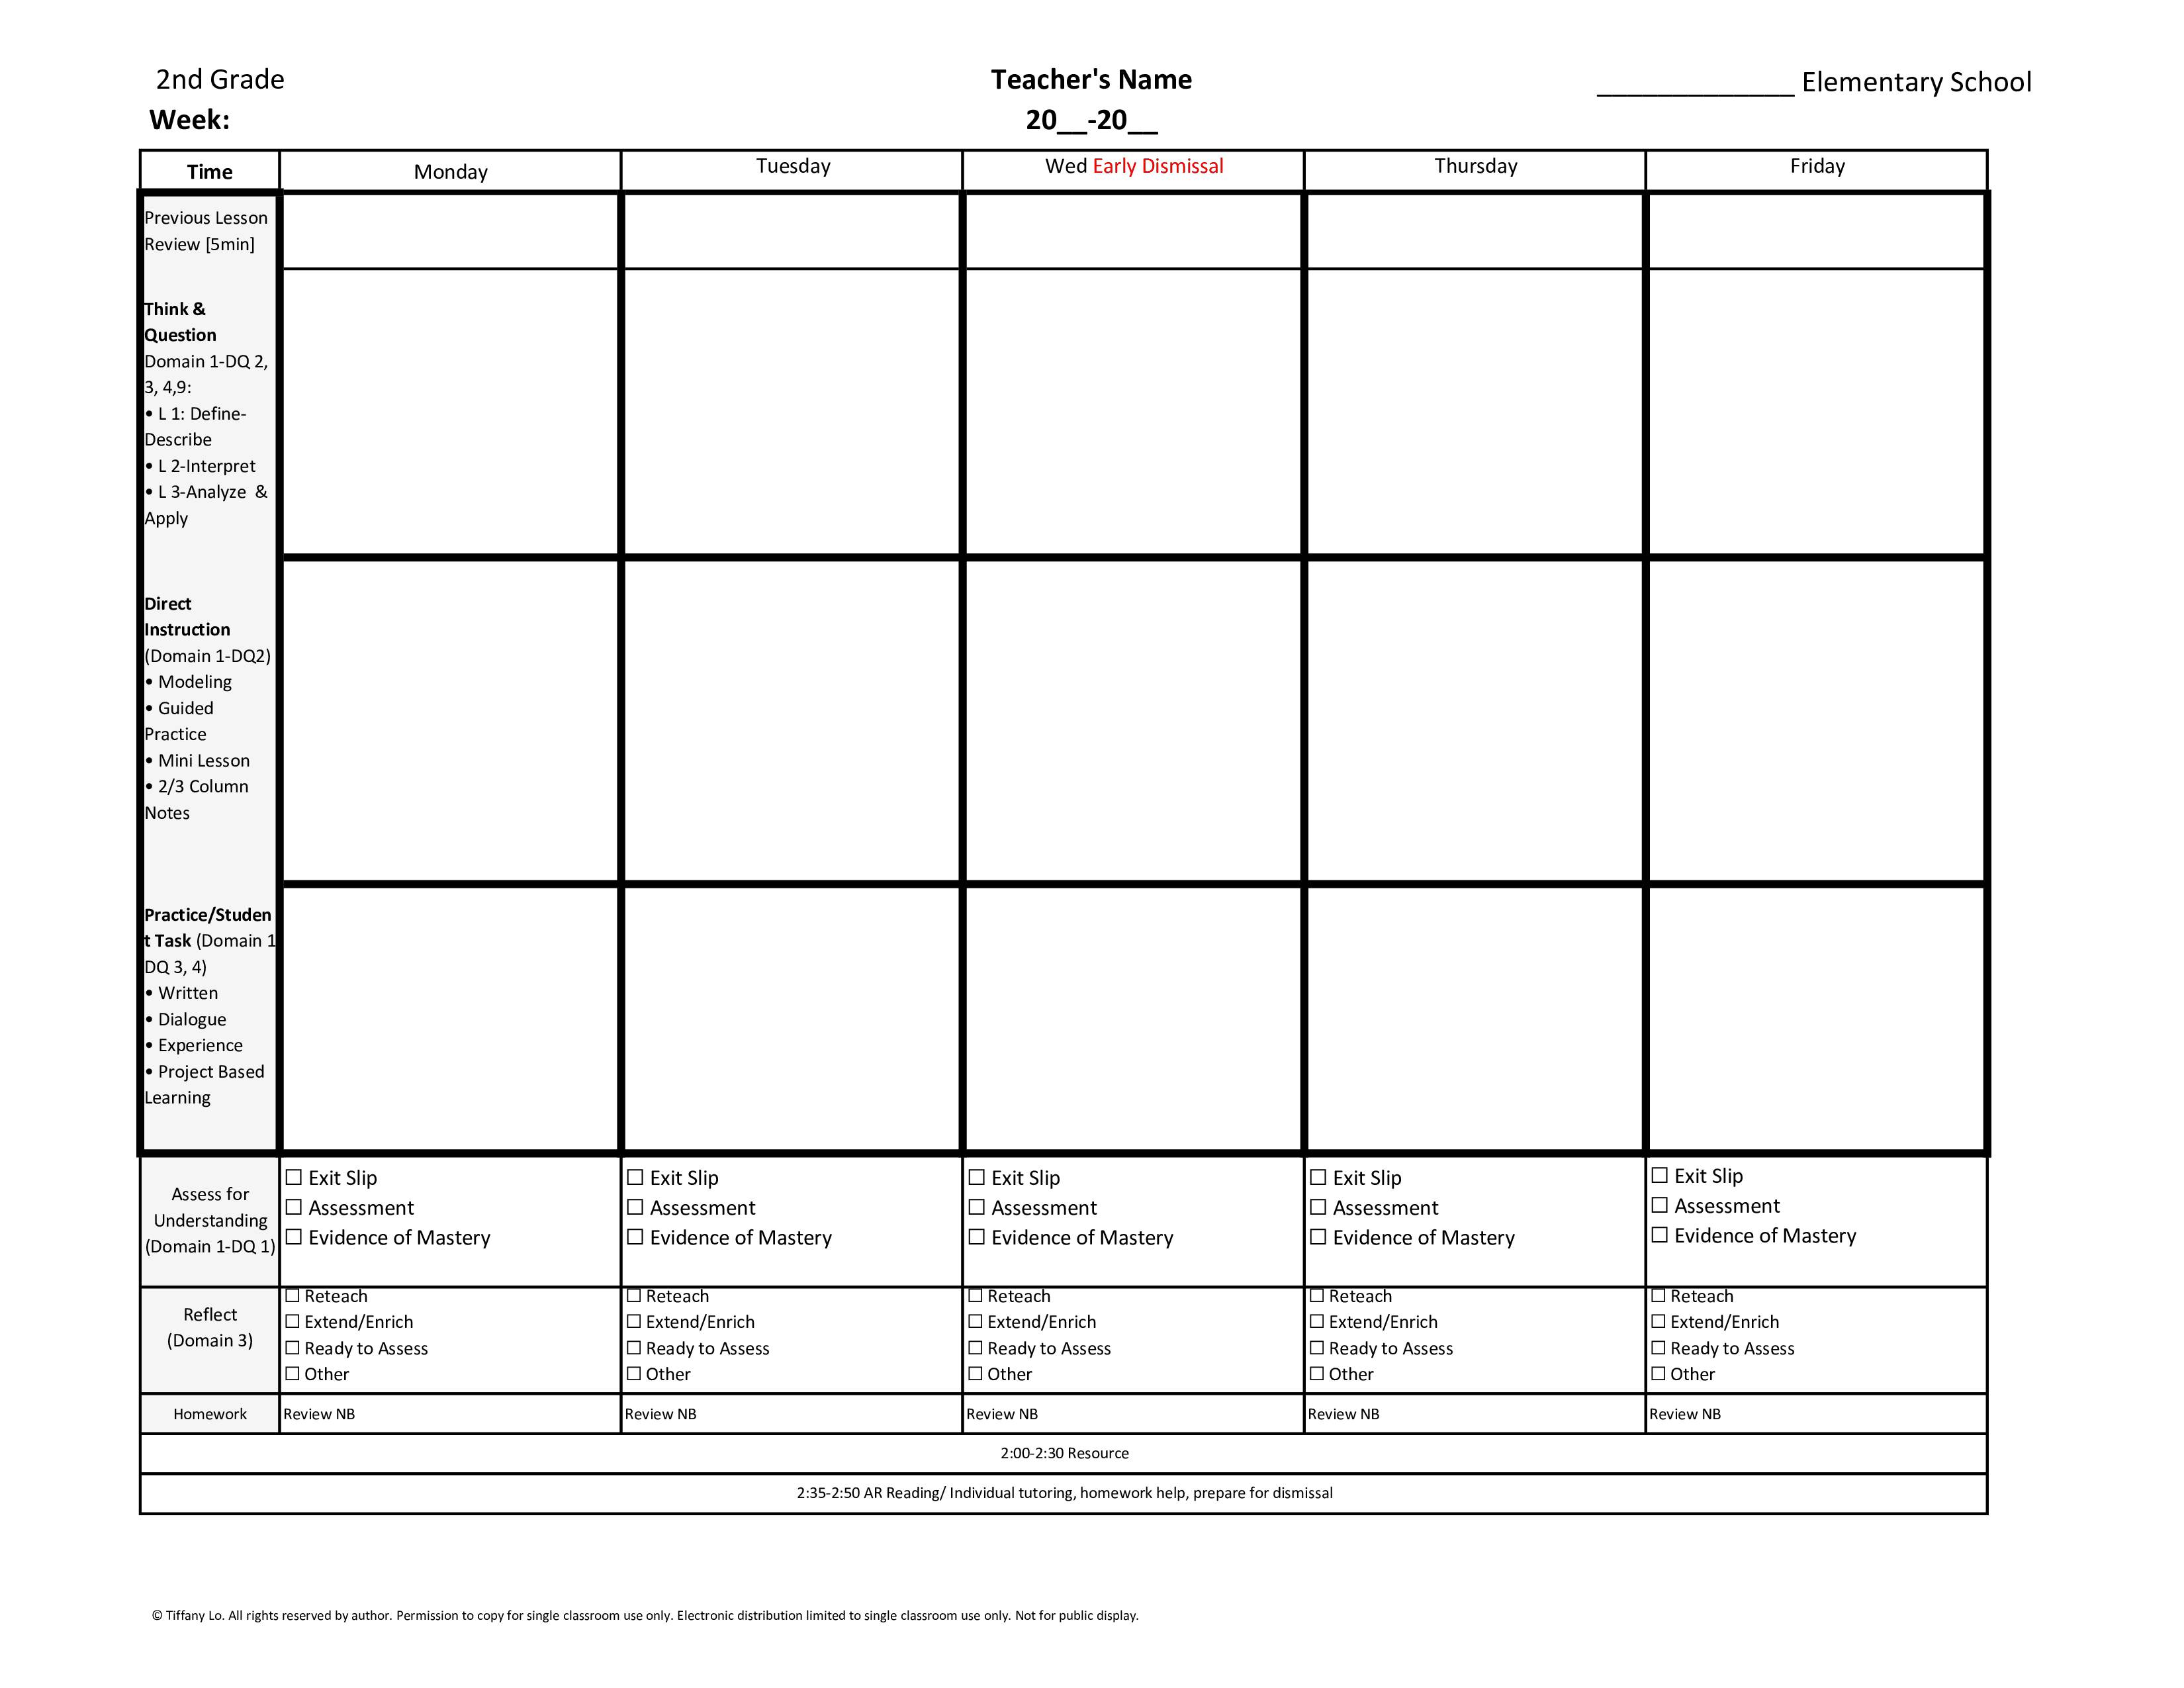 2nd Grade Weekly Lesson Plan Template W Florida Standards Drop Down 